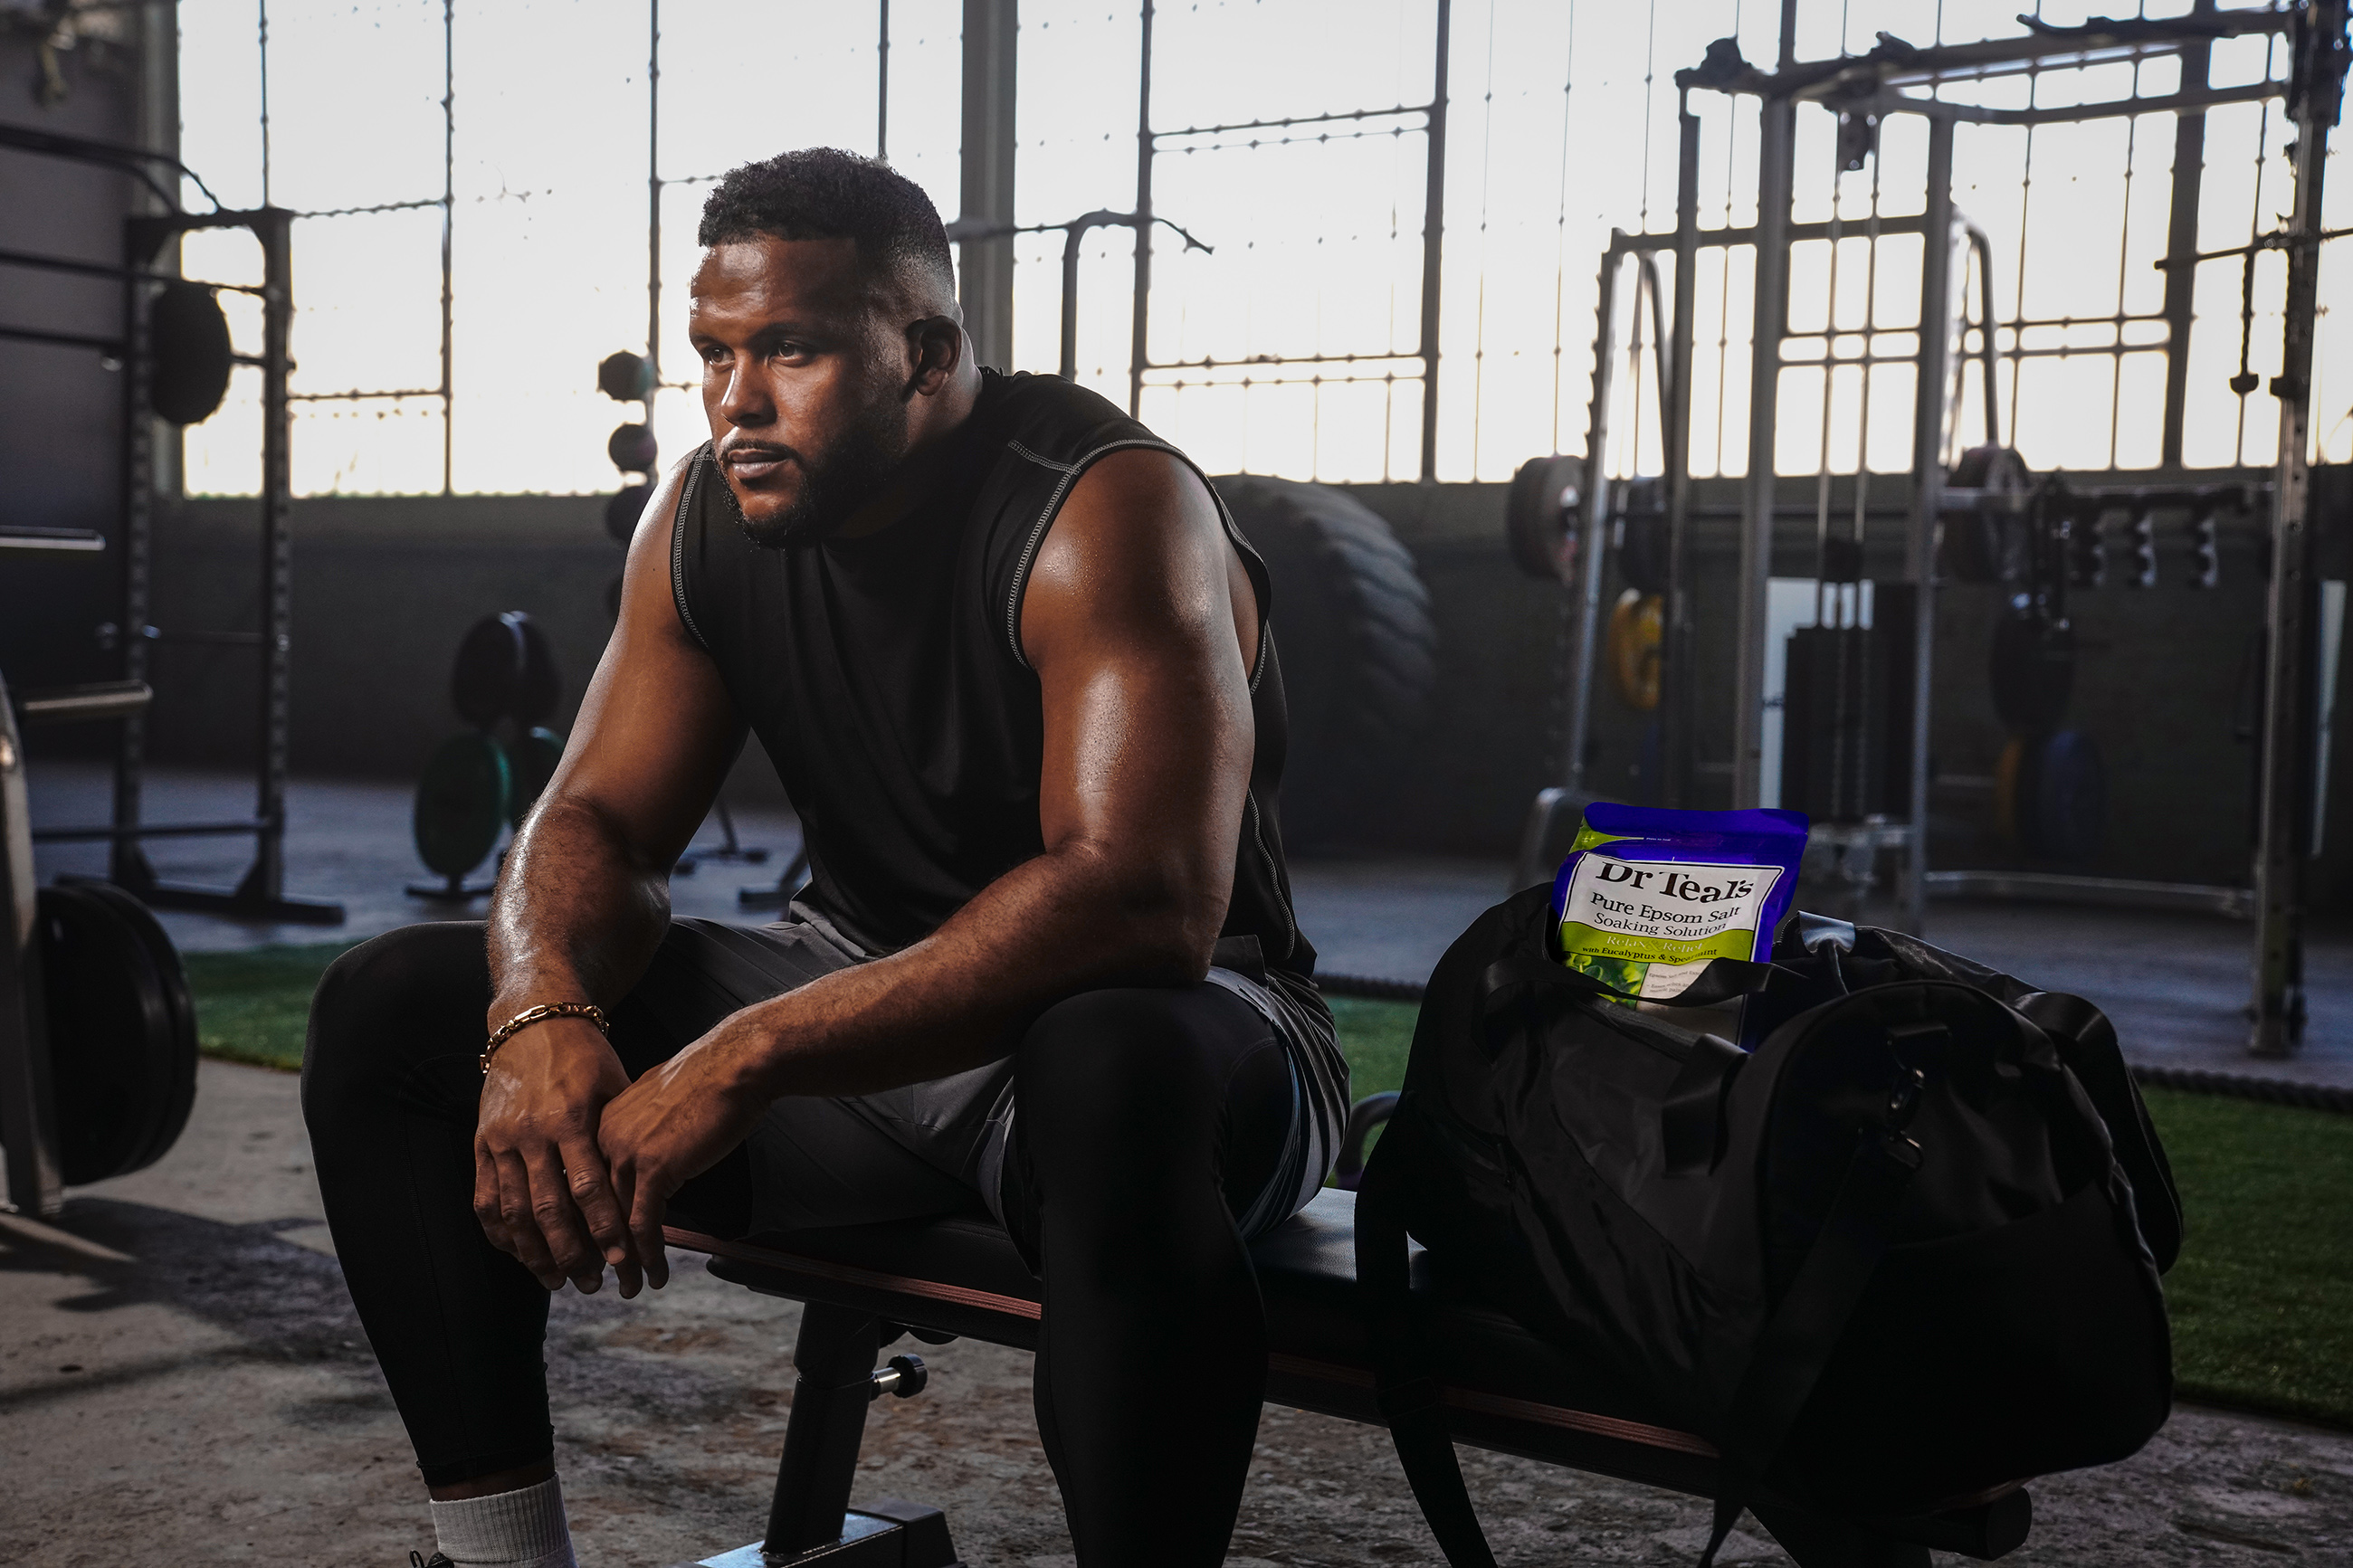 Dr Teal’s teams up with All-Pro Defensive End Aaron Donald once again to share the importance of muscle recovery